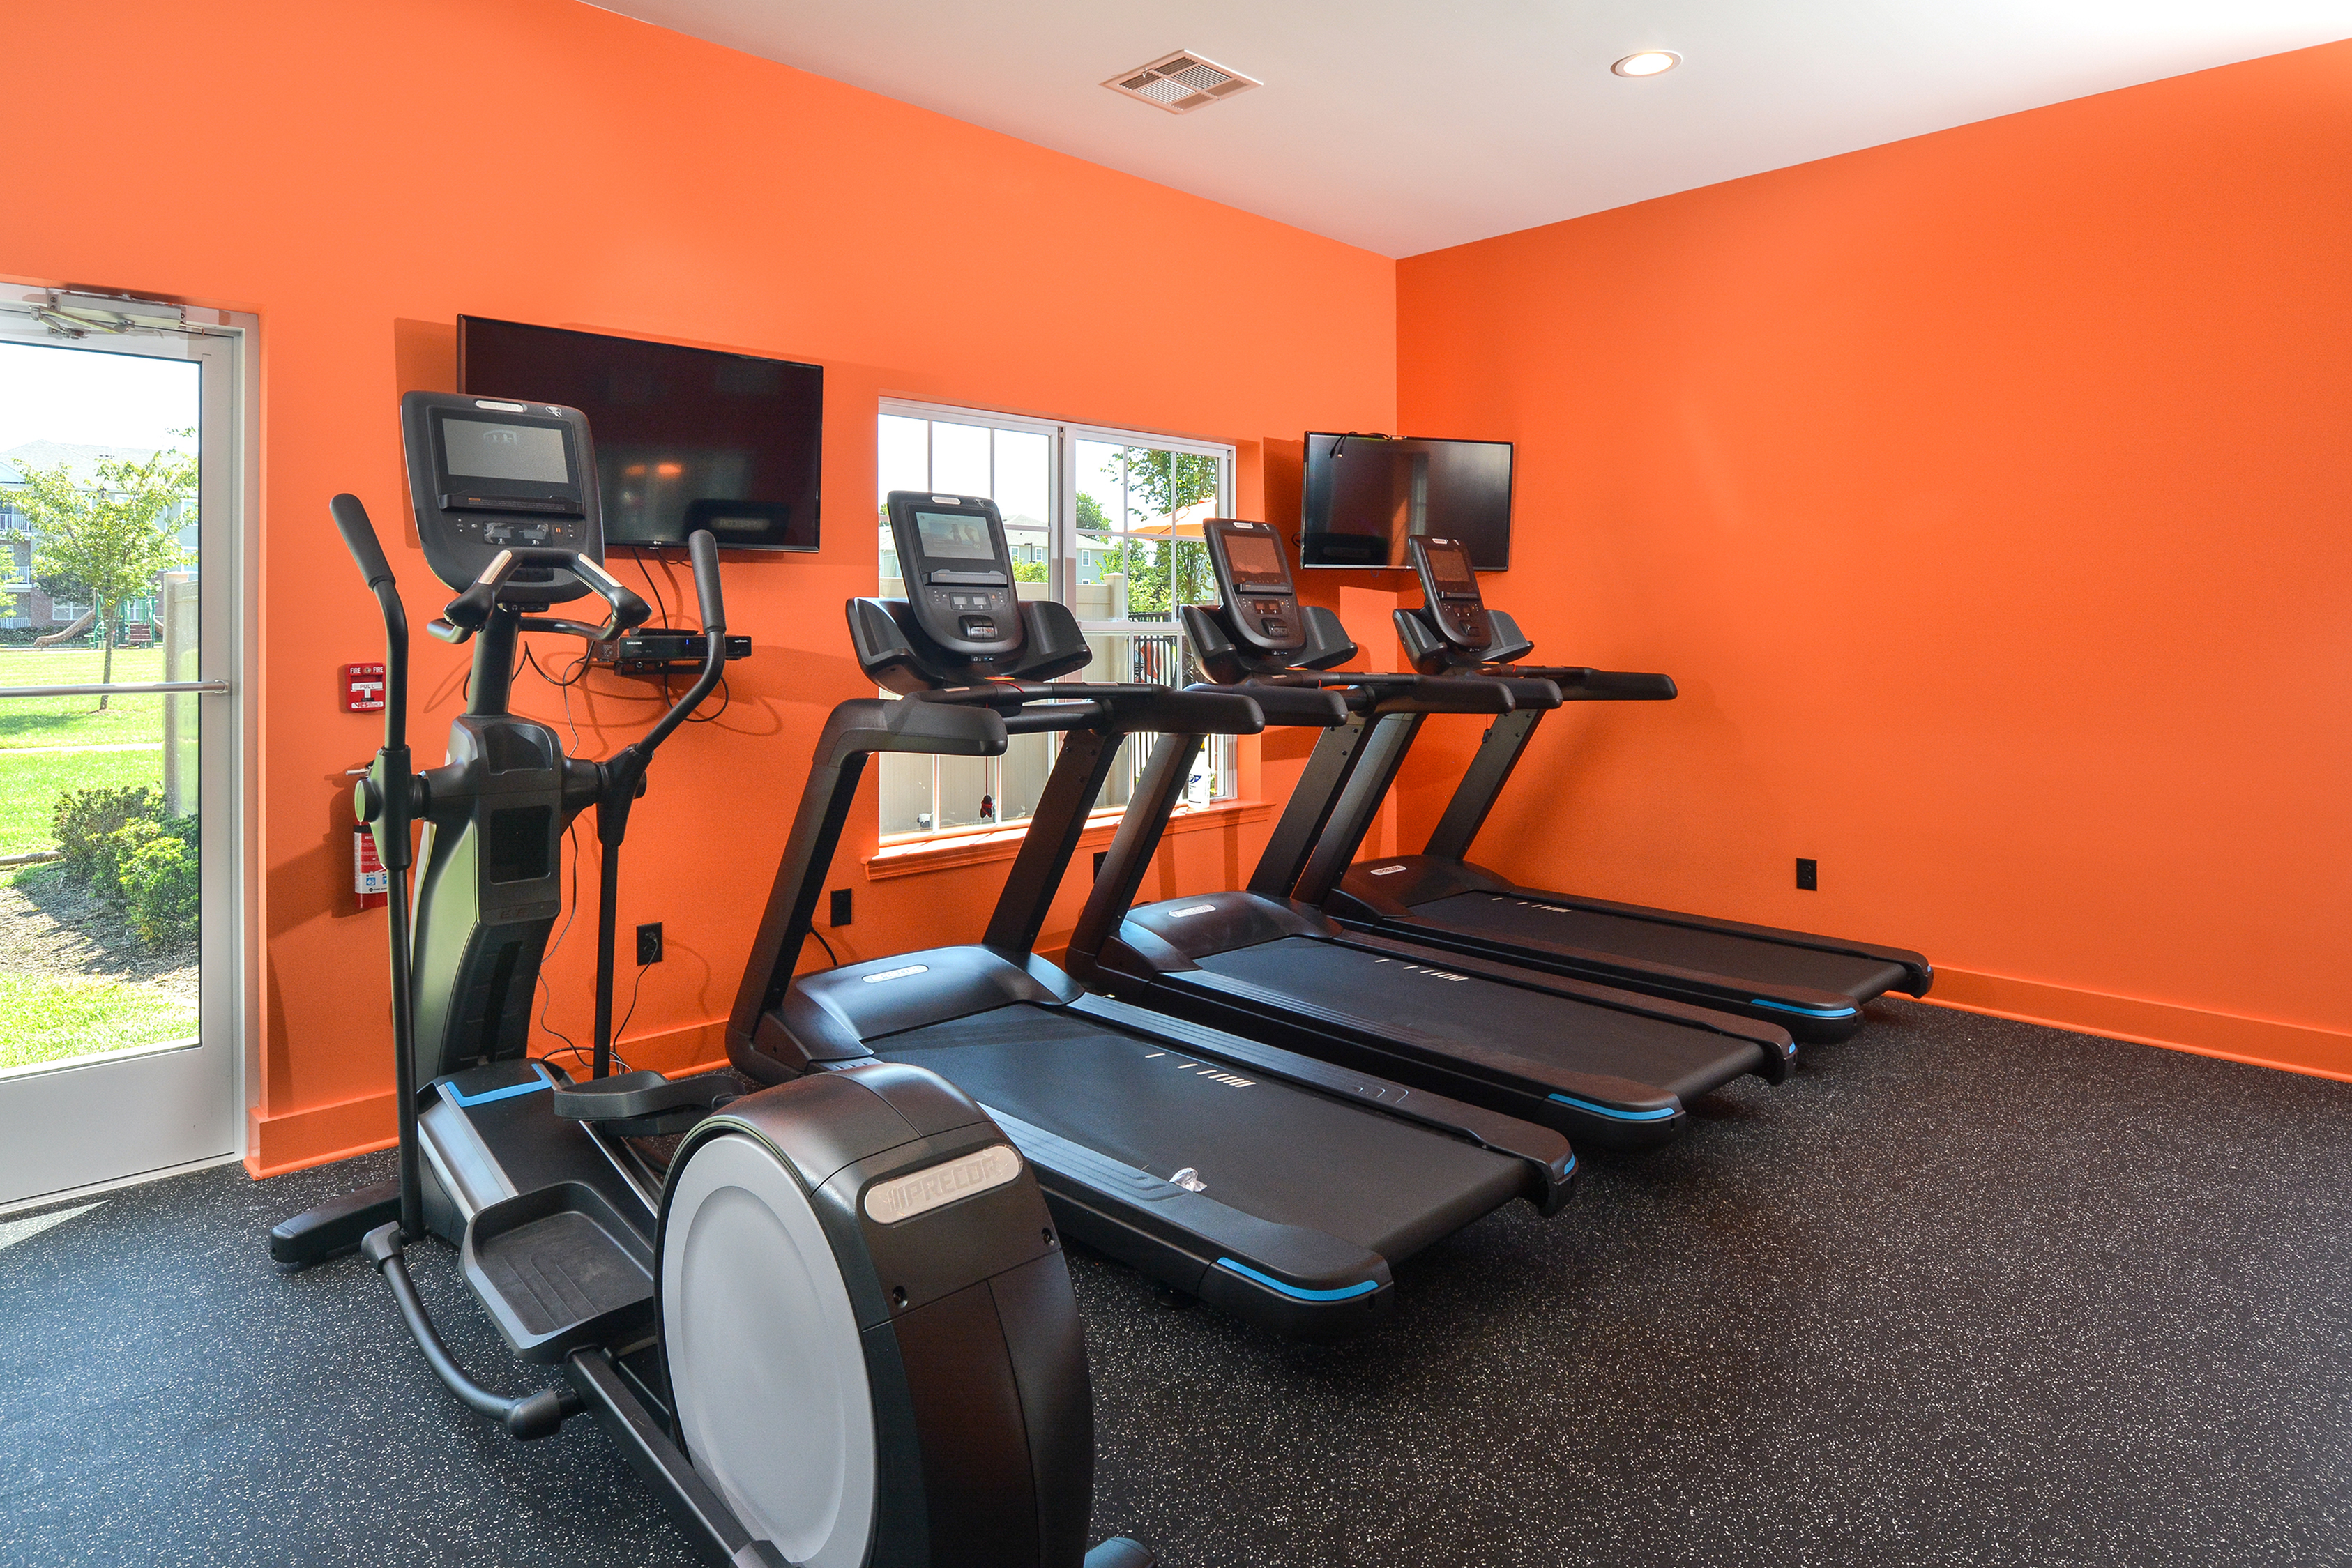 Apartments with a fitness center